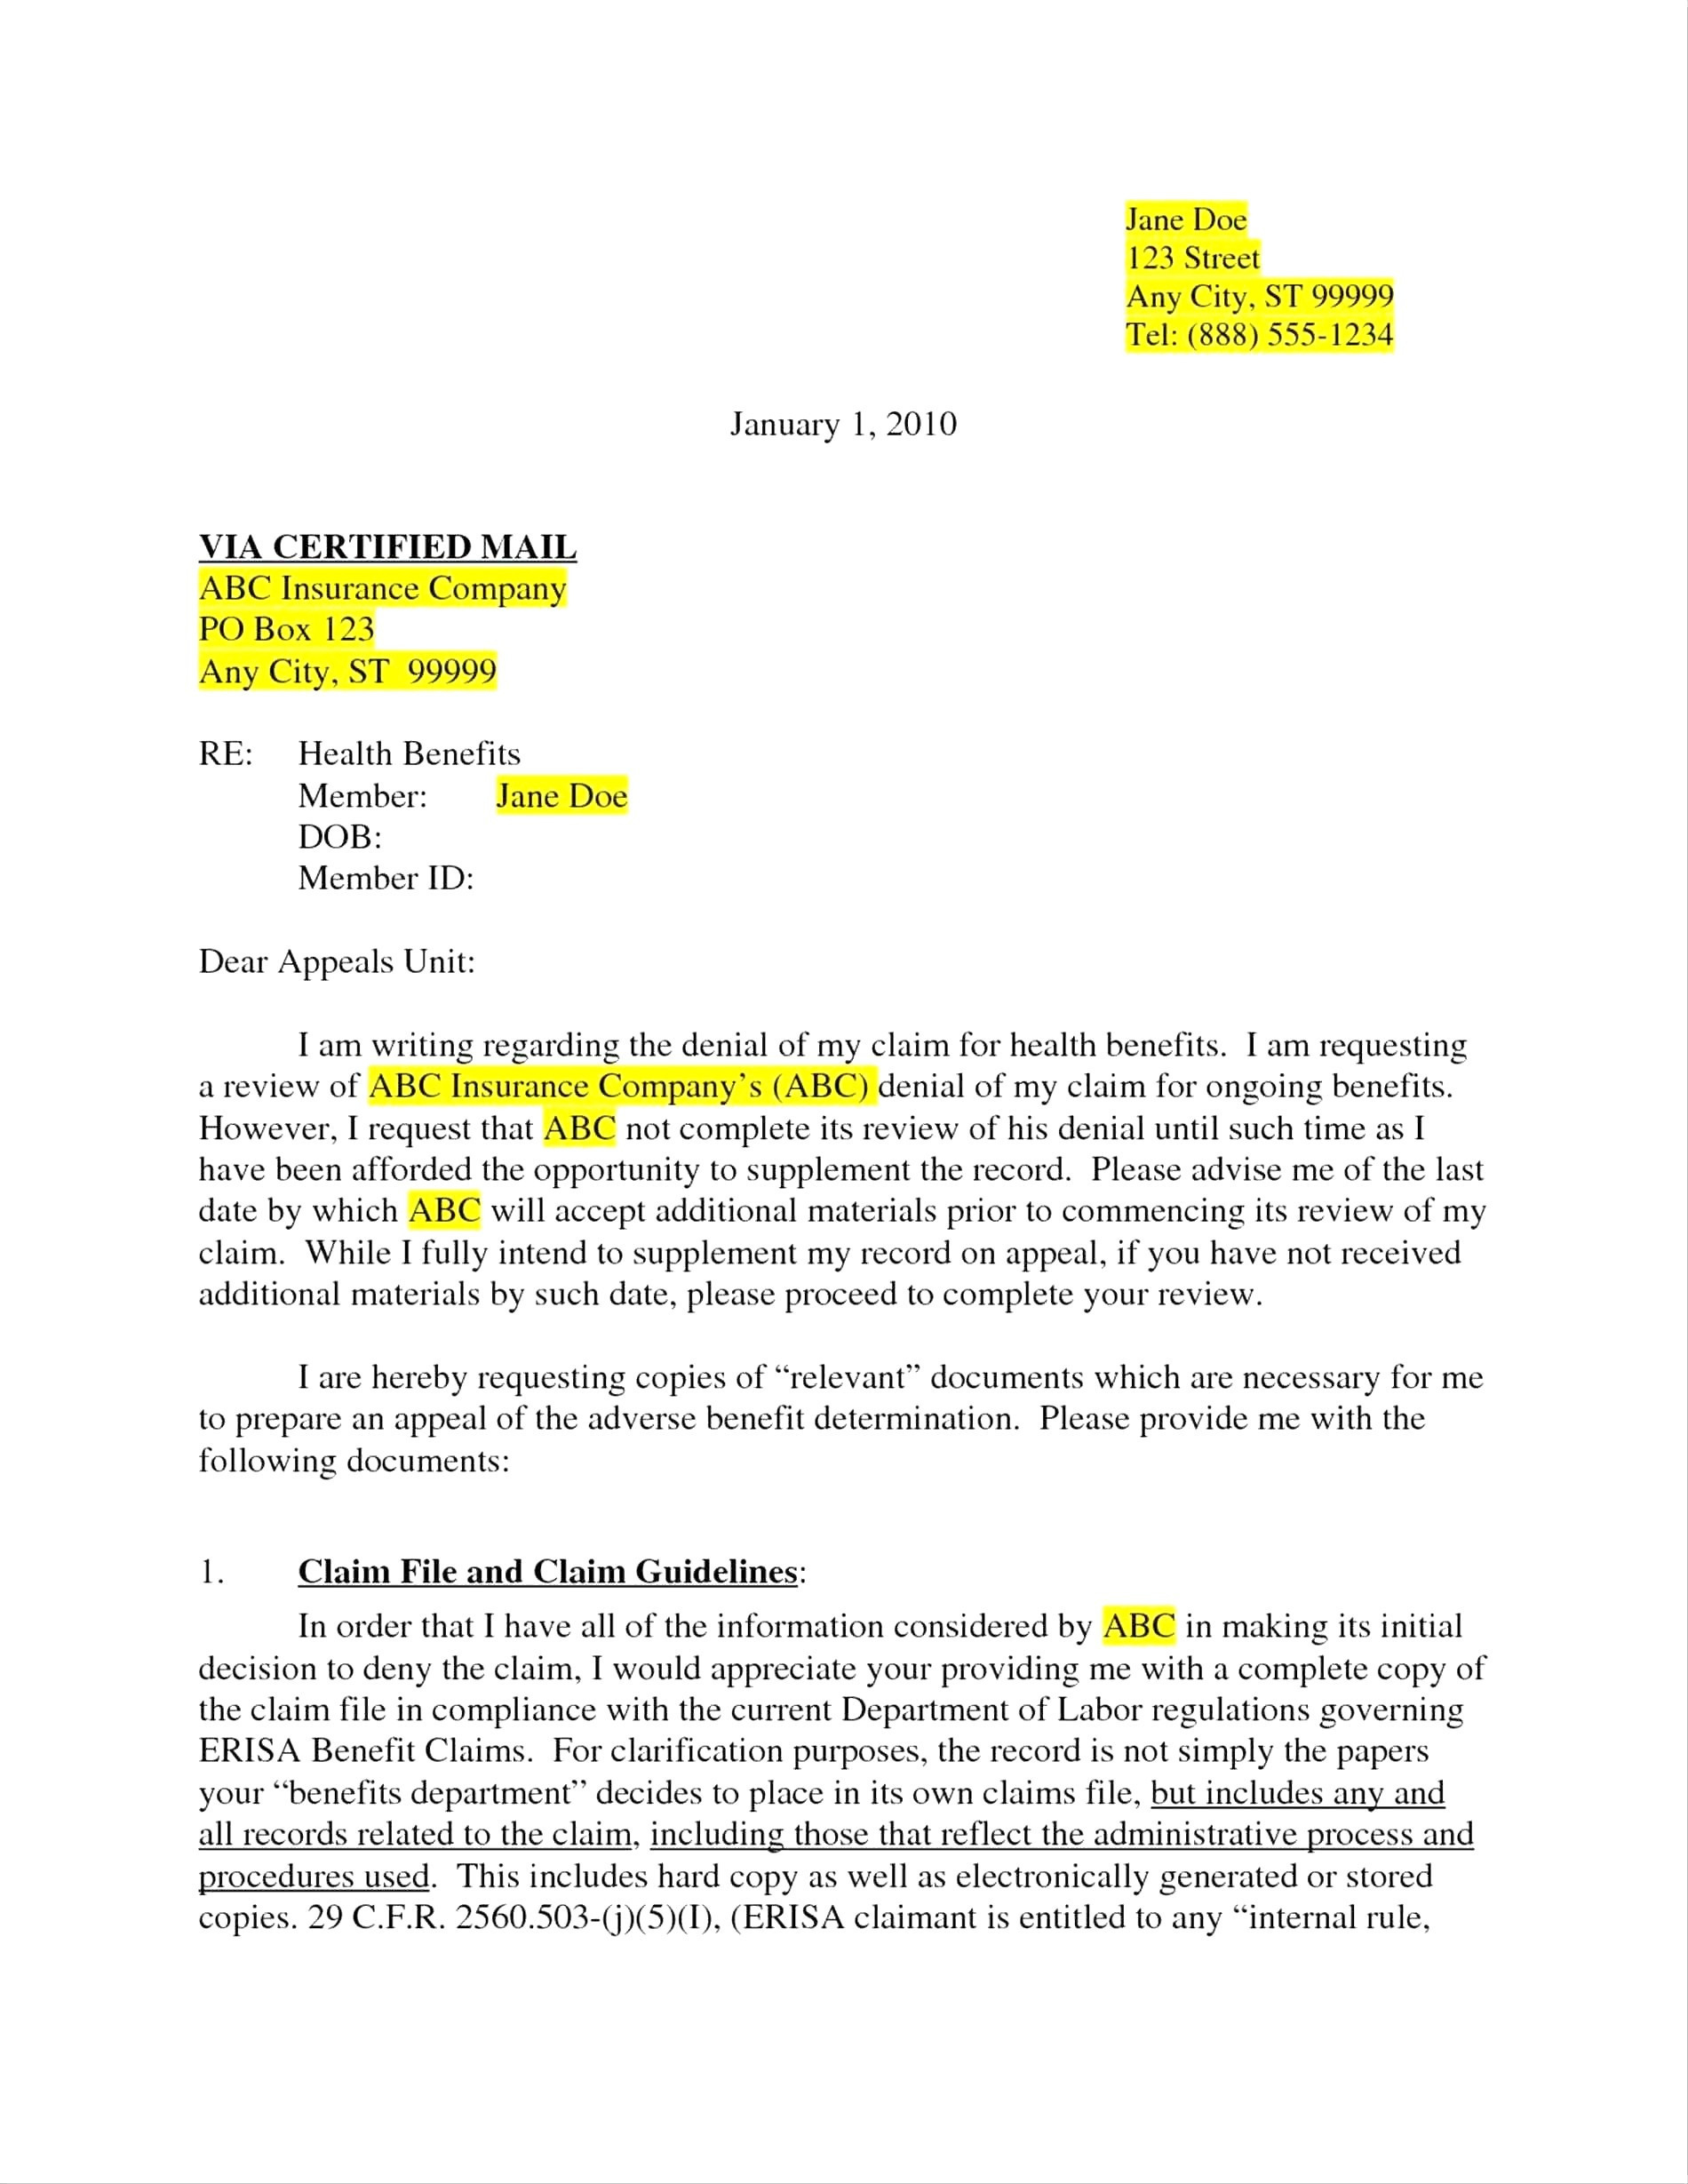 12 Medical Necessity Appeal Letter Template Samples intended for Letter Of Medical Necessity Template